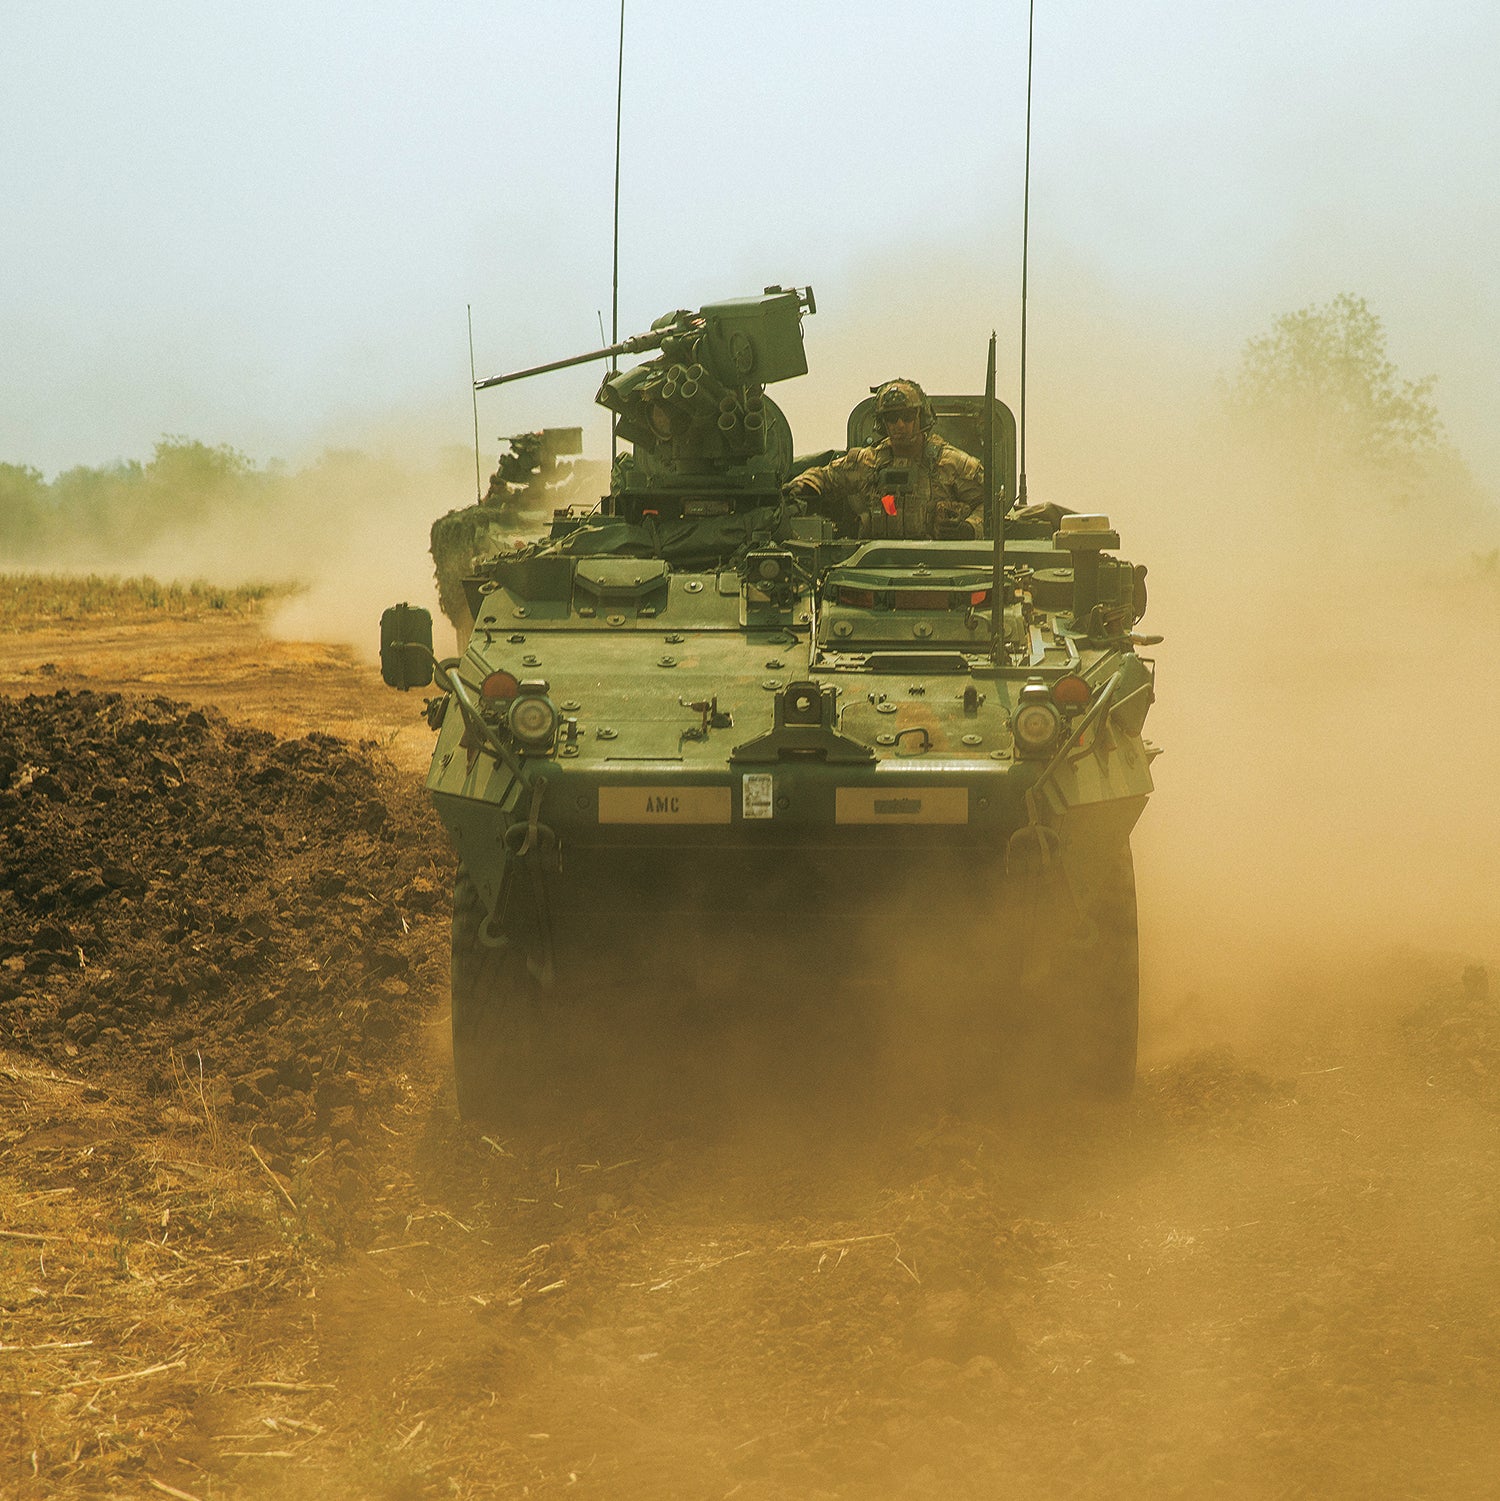 Stryker vehicle crews from the 2nd Battalion, 3rd Infantry Regiment, prepare for a live-fire event during an exercise in Thailand. (Credit: U.S. Army/Spc. Christopher Wilkins)